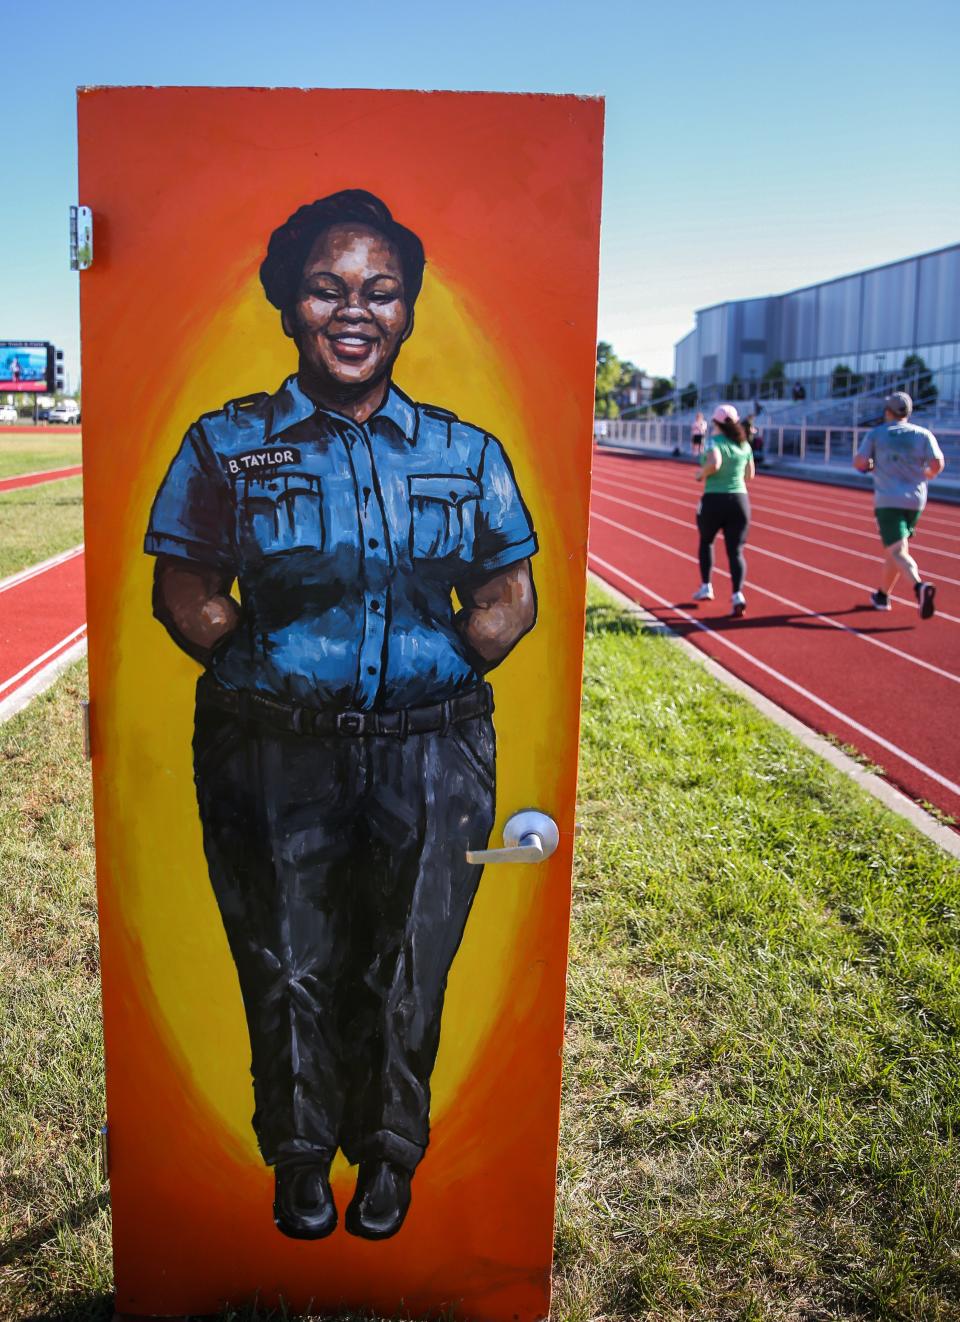 Participants compete in the Race for Justice by Future Ancestors at the Norton Healthcare Sports and Learning Center in Louisville, Kentucky on June 18, 2022.